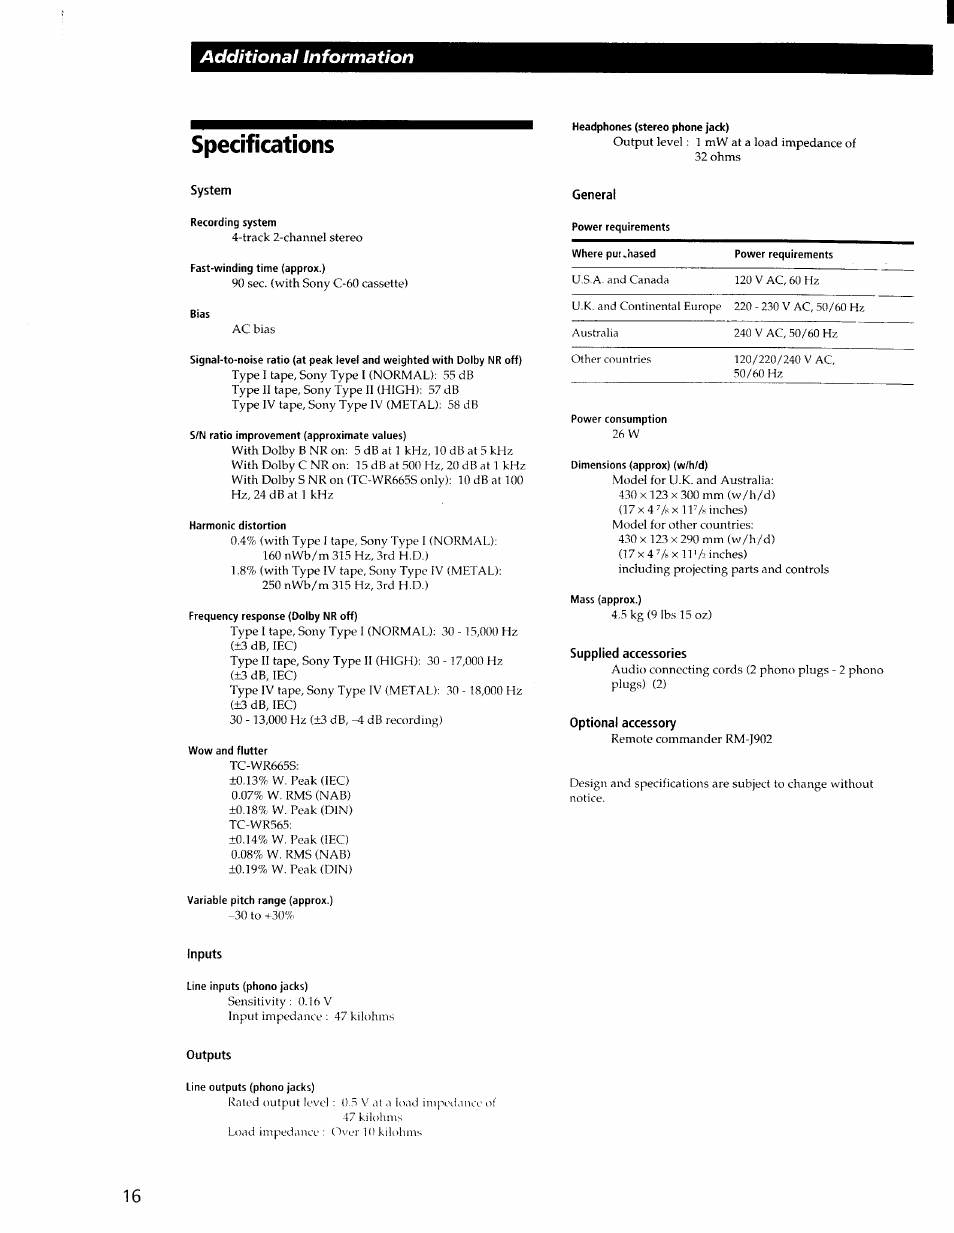 Specifications, System, General | Supplied accessories, Optional accessory, Inputs, Outputs, Additional information | Sony TC-WR565 User Manual | Page 16 / 20